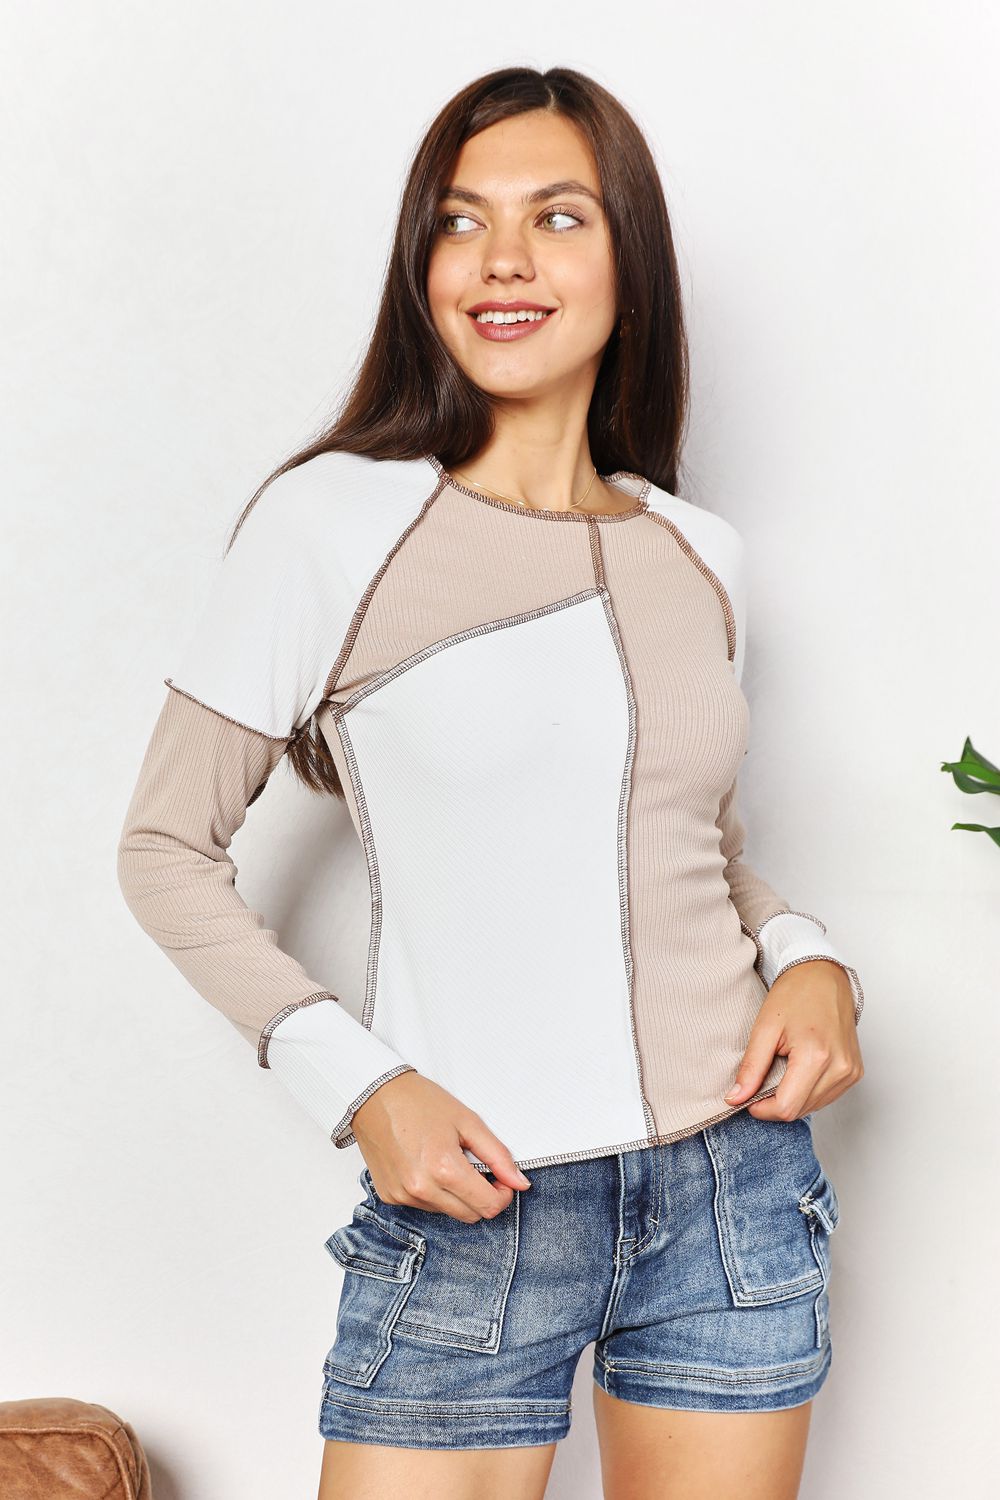 Color Block Exposed Seam Top in KhakiTopDouble Take